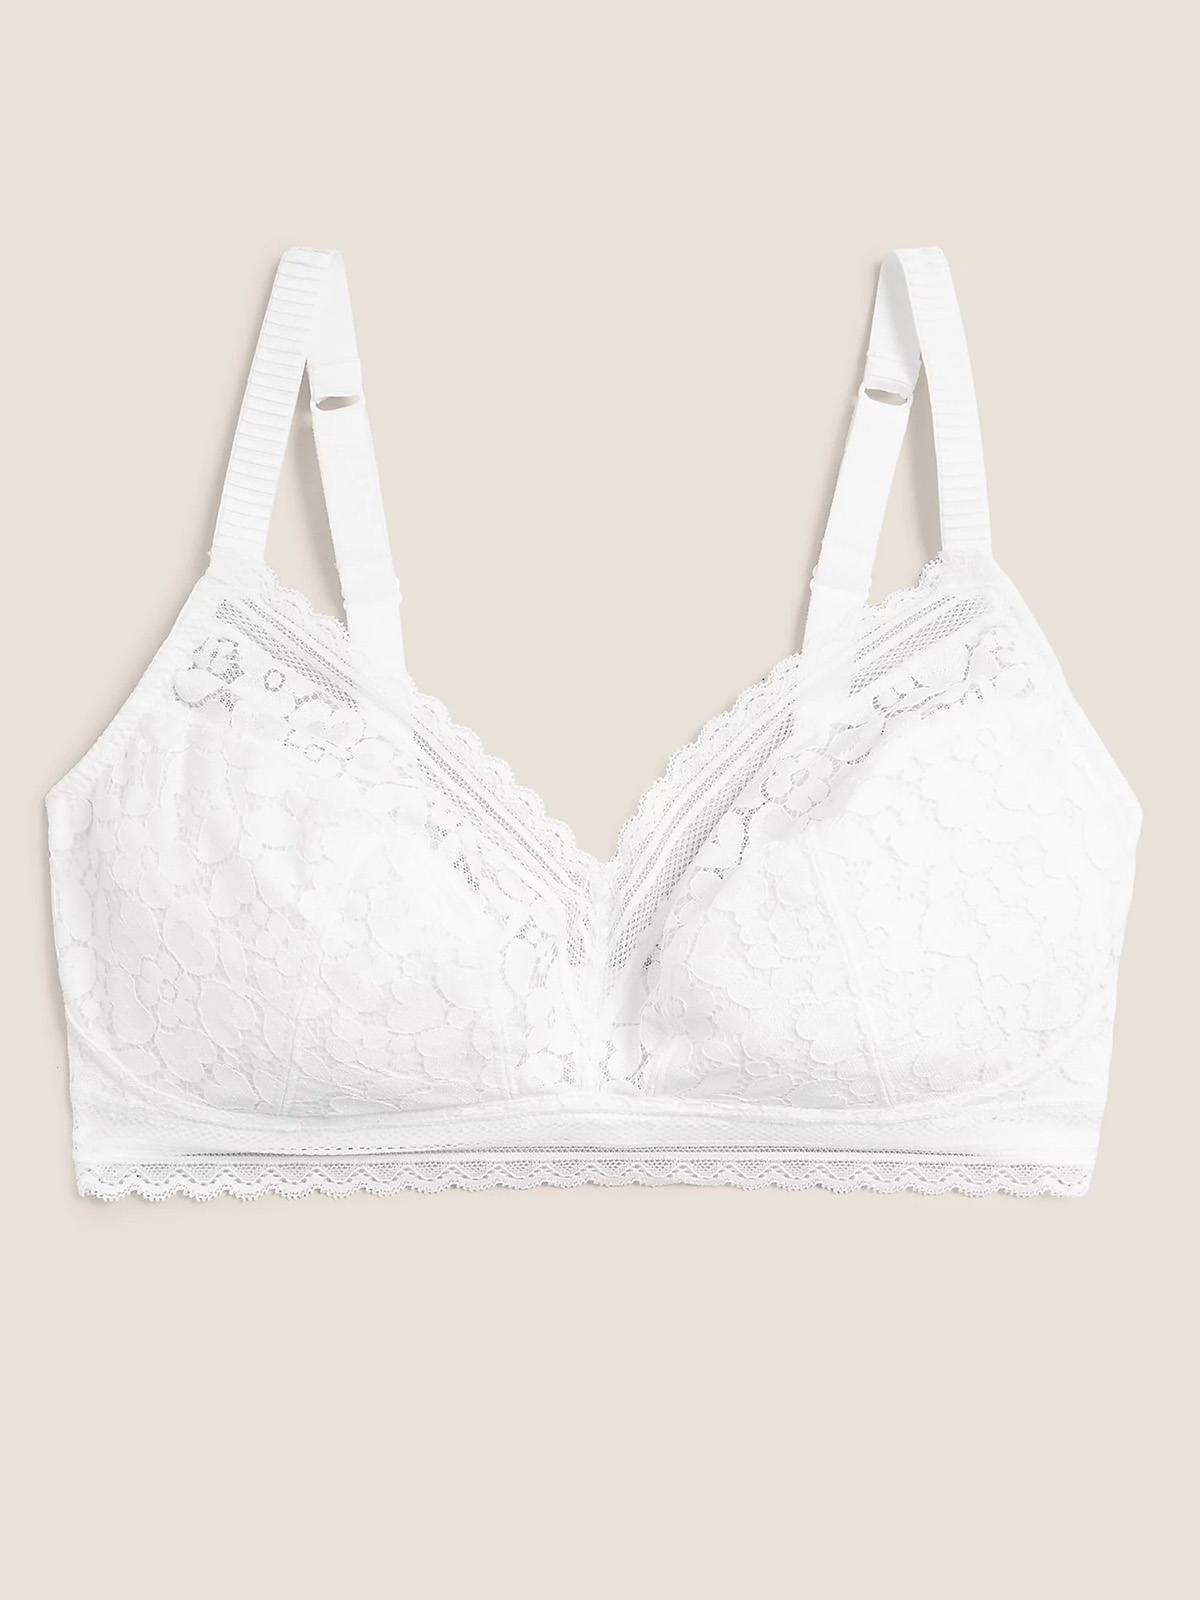  - - WHITE Cotton & Lace Non-Wired Full Cup Bralette - Size 32 to 42 (A-D)